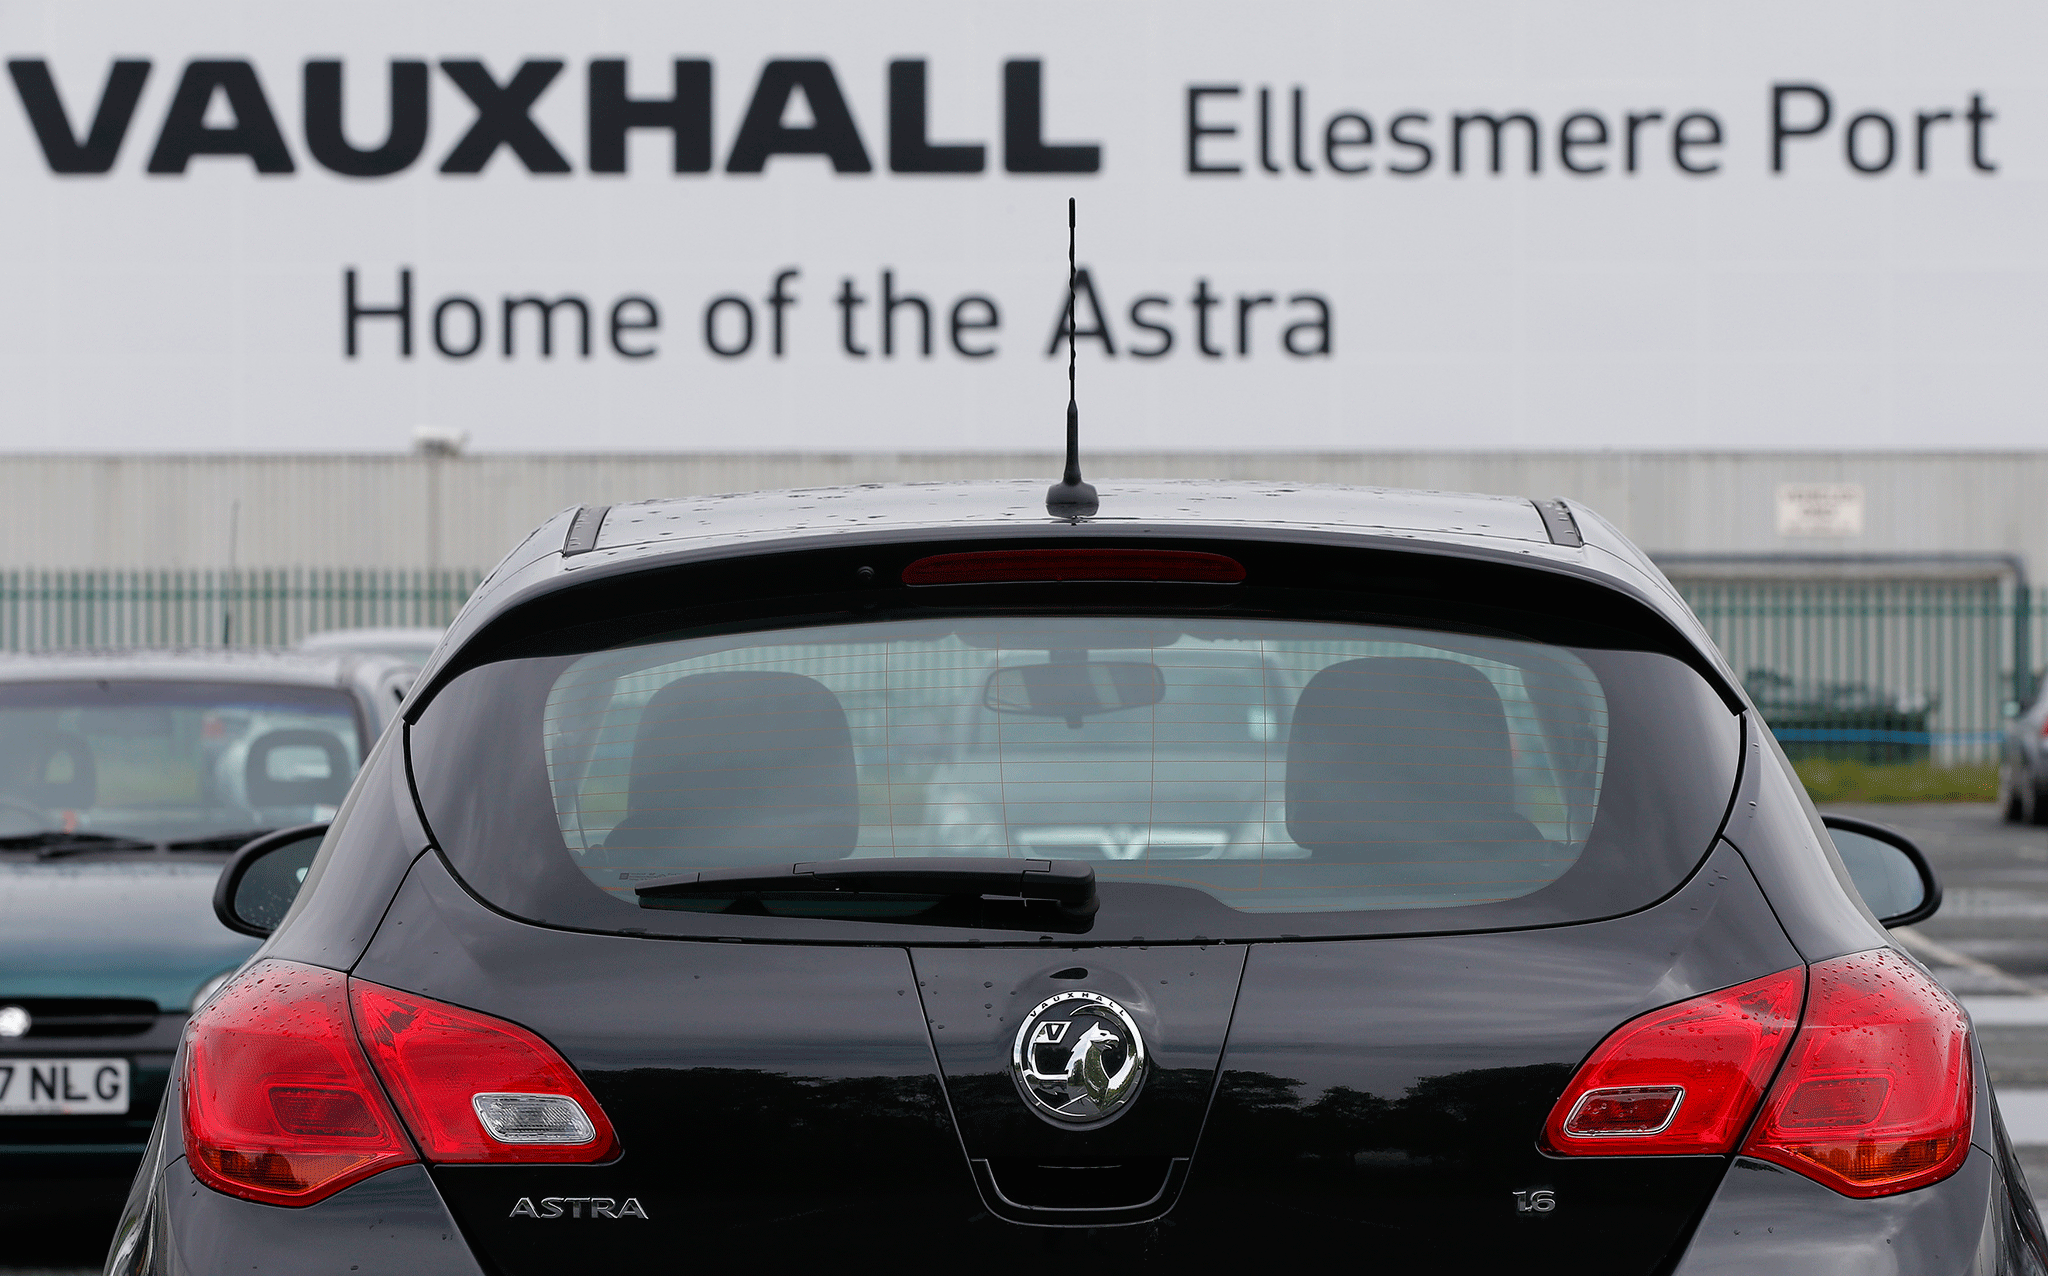 Mr Clarke arranged an emergency meeting with GM's president Dan Amman on Thursday after the company announced it was in talks to sell its European subsidiary, Opel, which includes Vauxhall